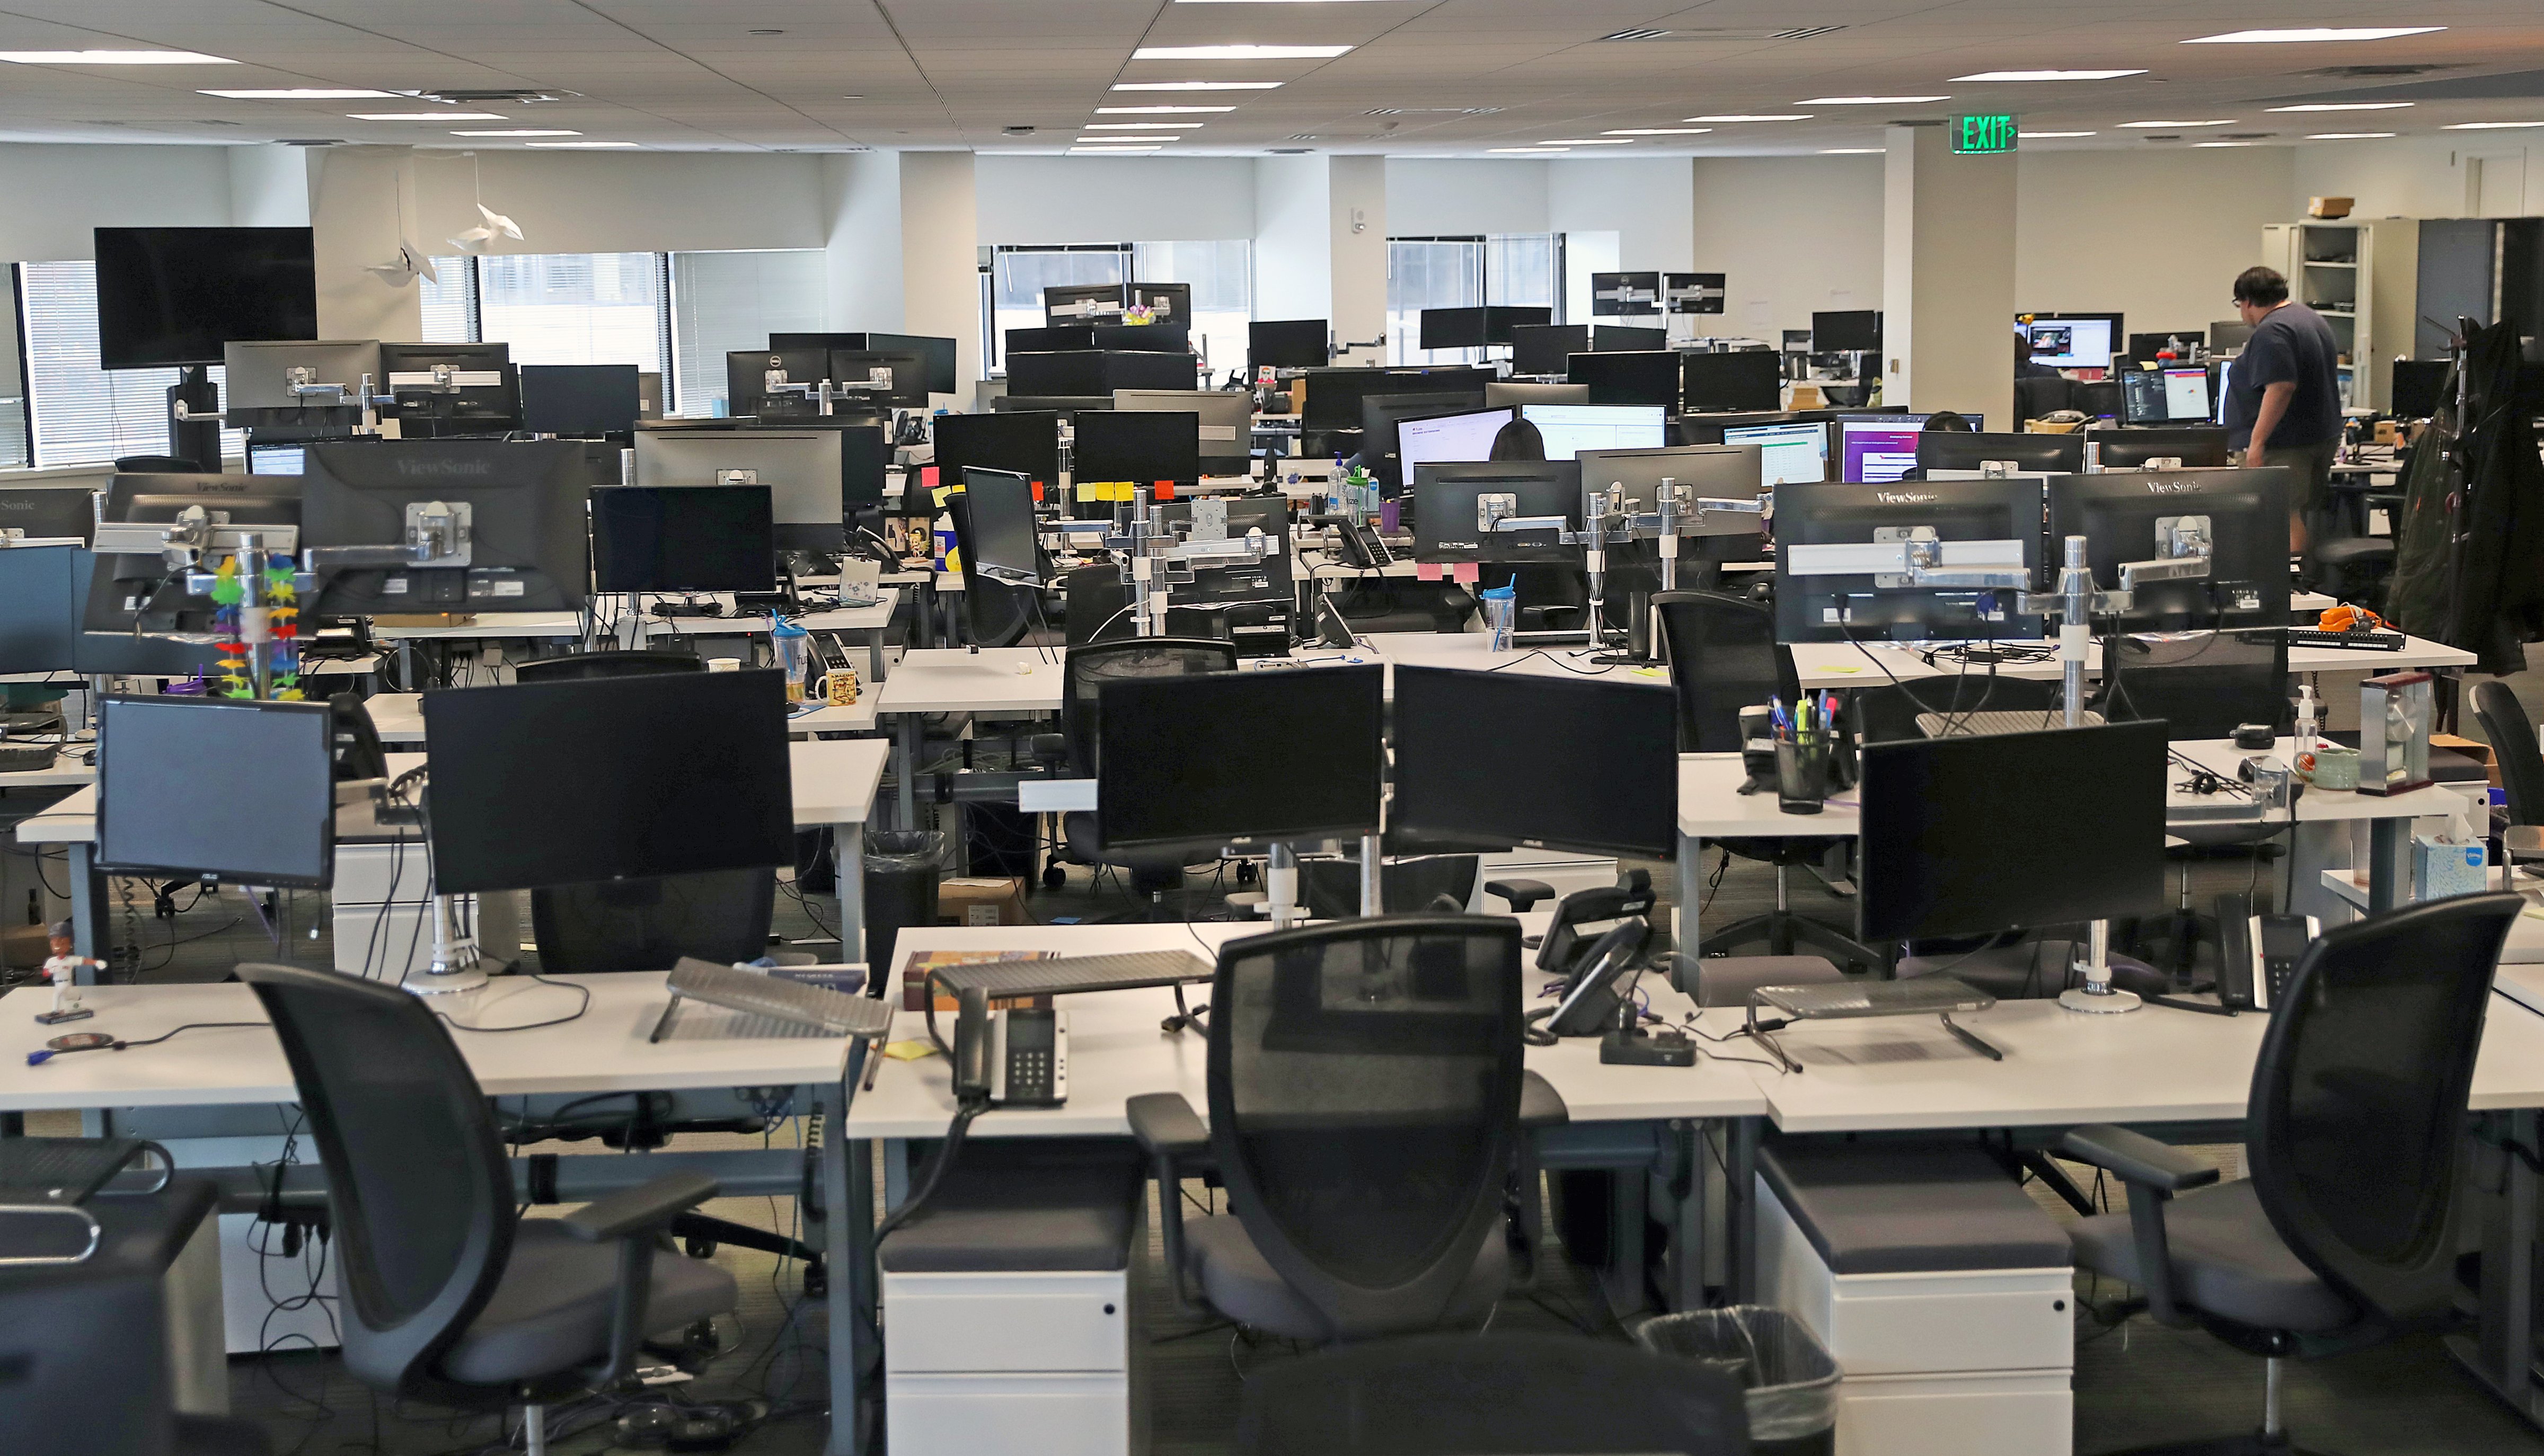 The office of Fuze, a Boston-based company, sits empty on March 10, 2020 after its 150 on-site employees were told to work from home due to concerns about the coronavirus. (David L. Ryan—Boston Globe/Getty Images)